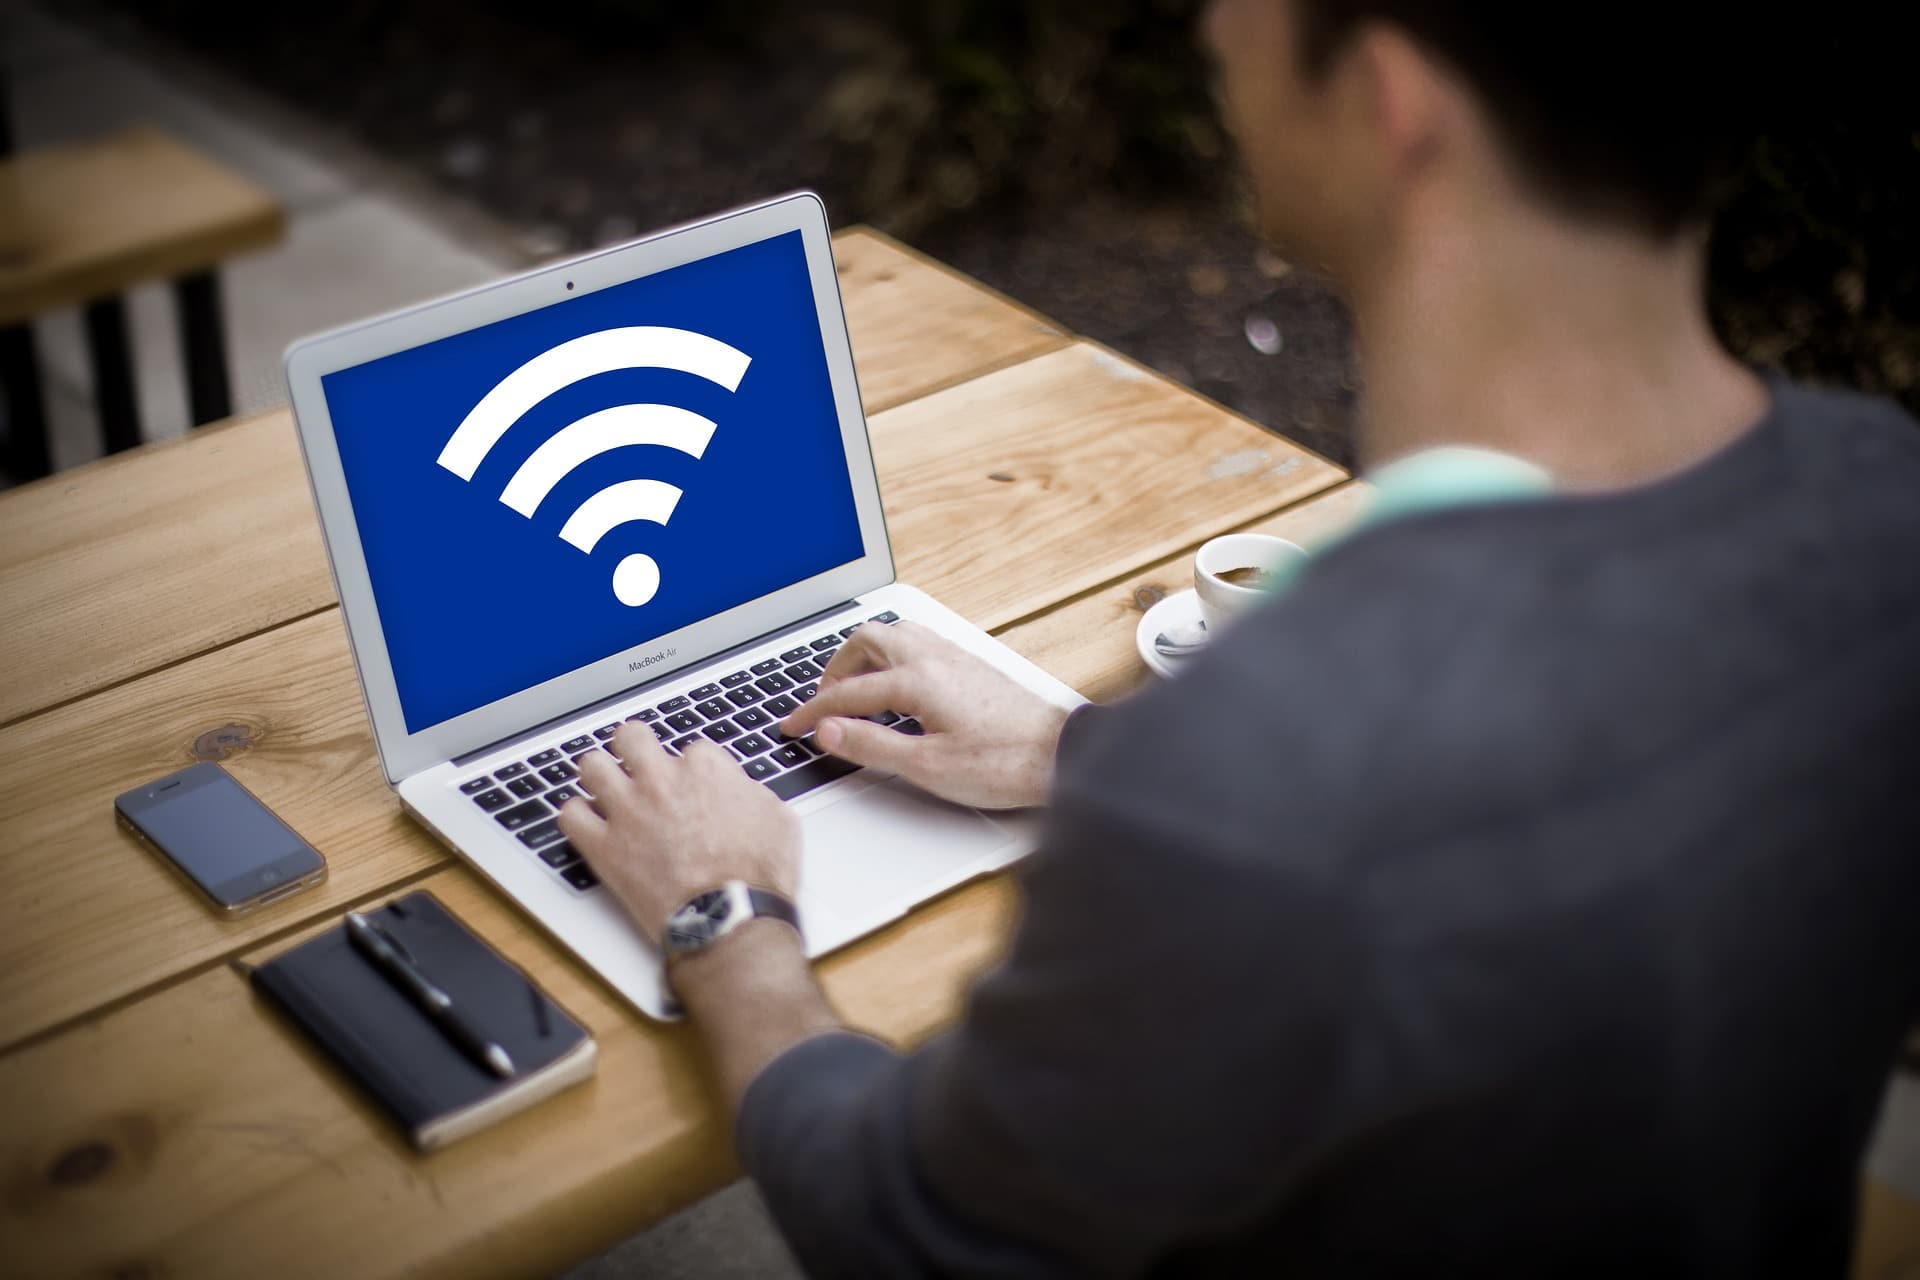 How To View Saved WiFi Passwords on Windows, macOS, iOS & Android